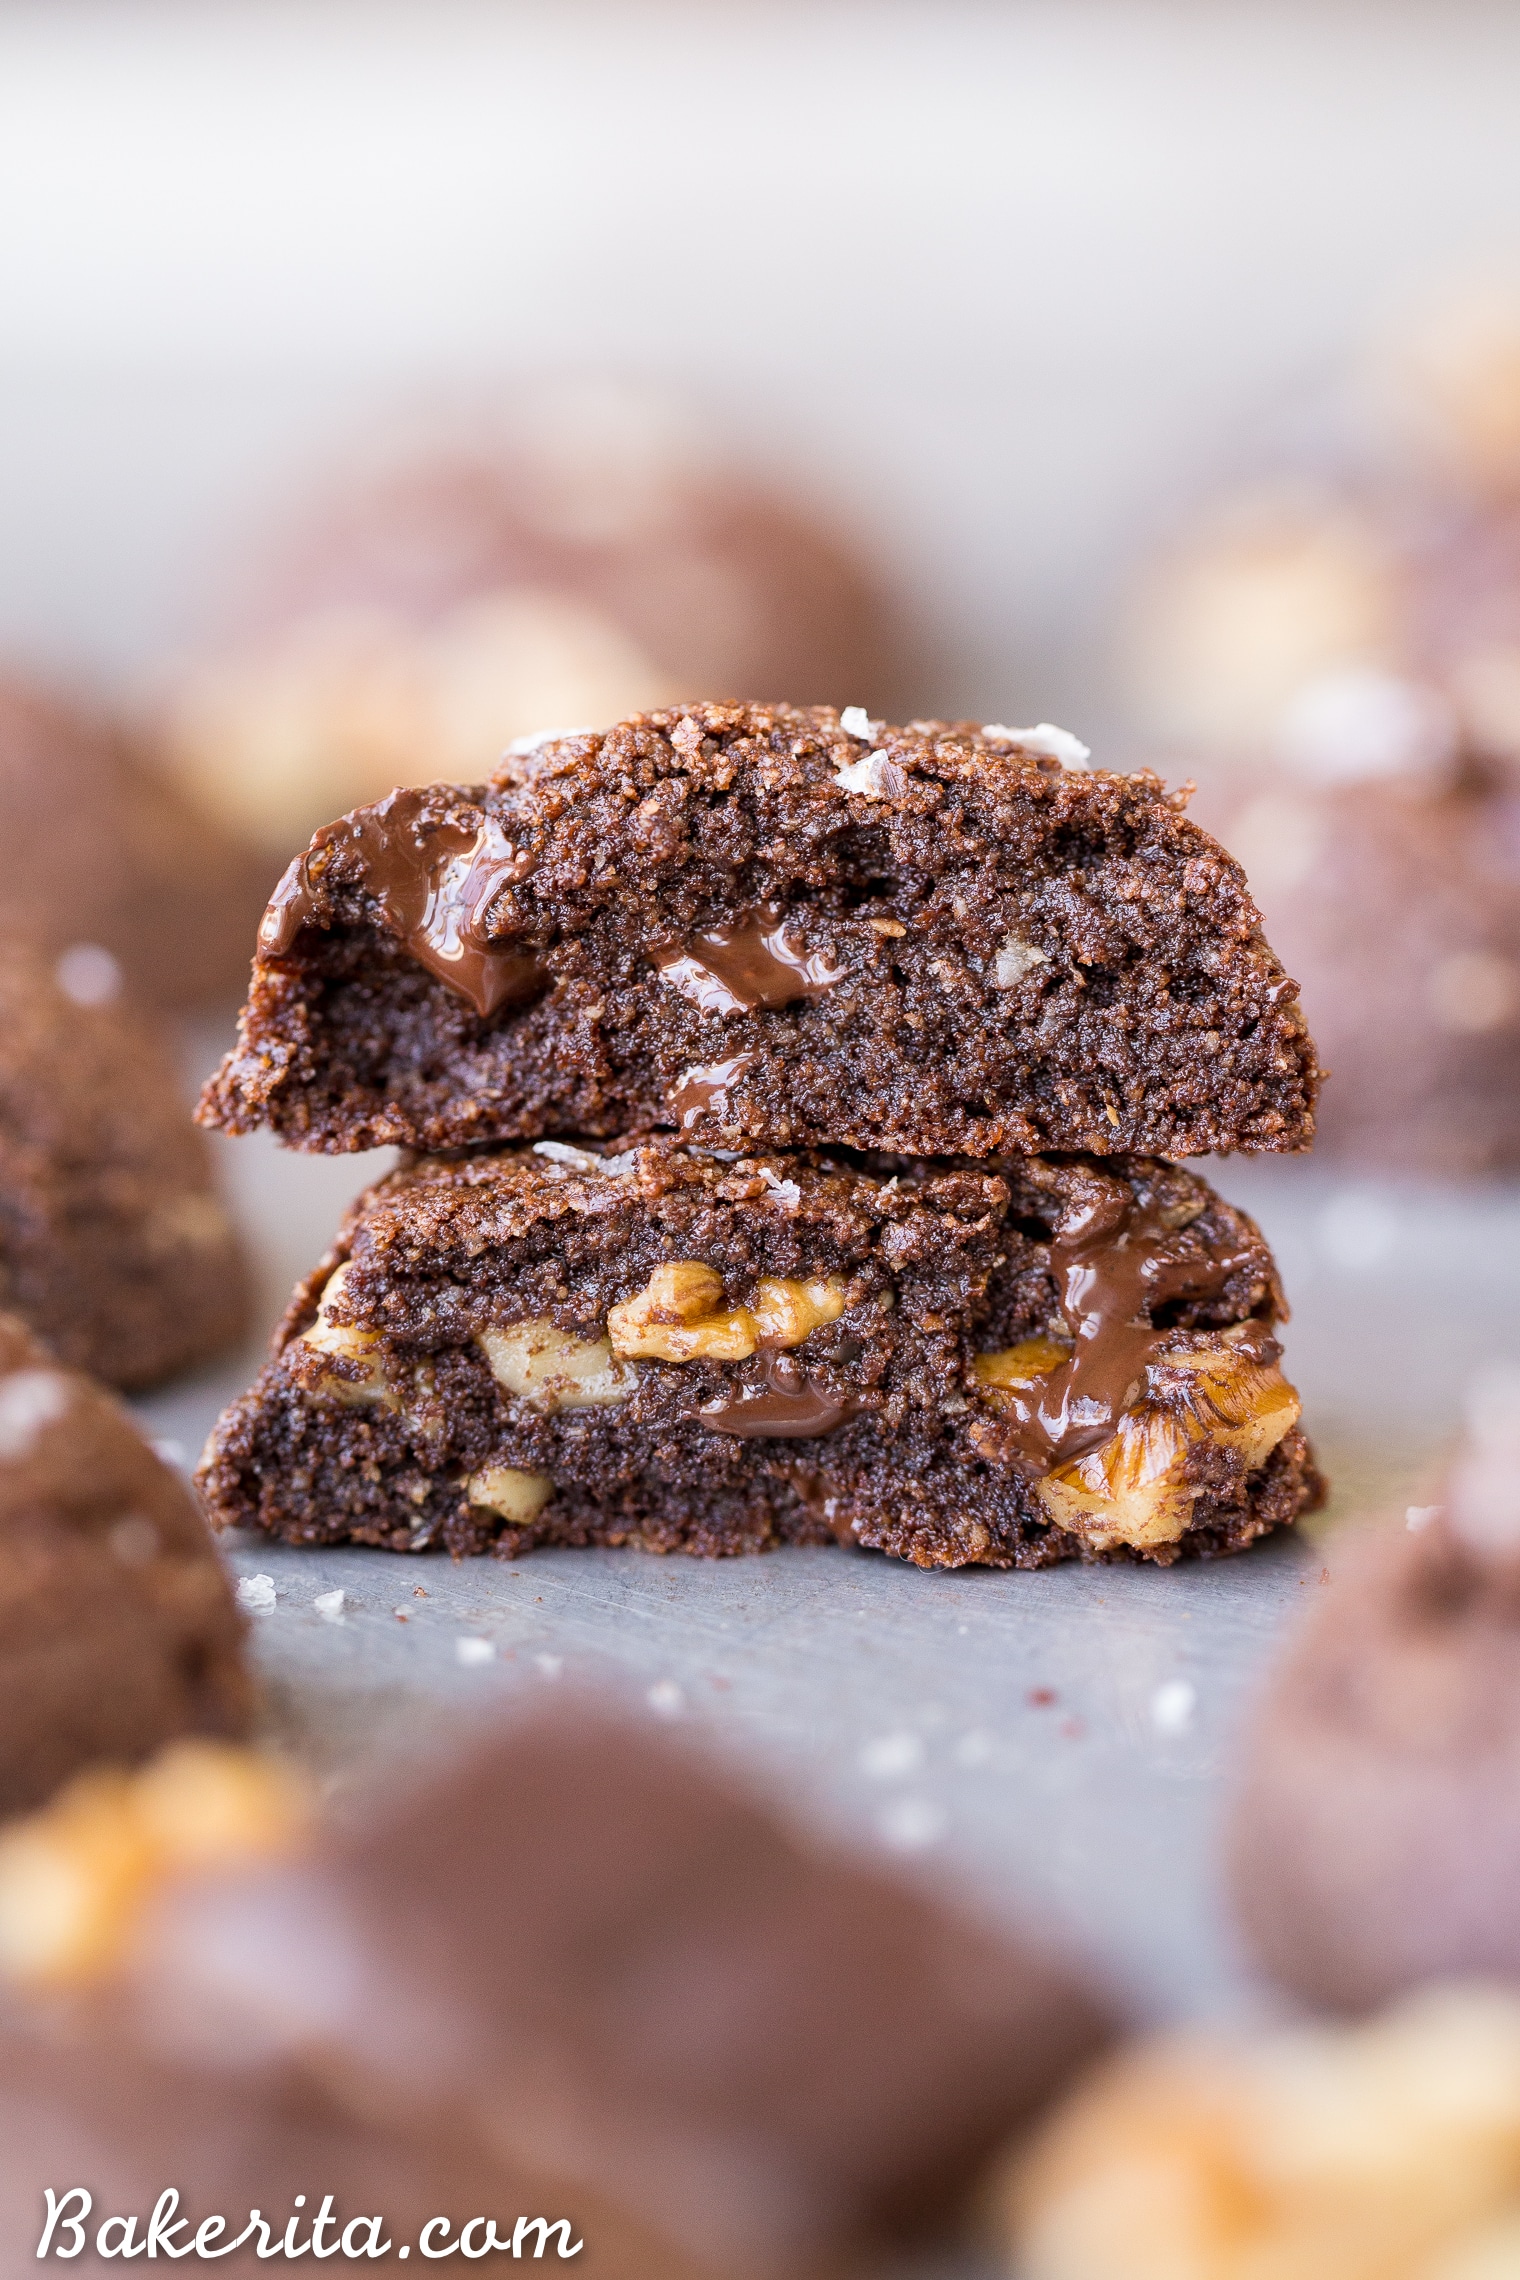 These Dark Chocolate Chunk Cookies are incredibly rich and dark, with melty chocolate chunks and toasted walnuts for crunch. These chewy, fudgy dark chocolate chip cookies are gluten-free, paleo, and vegan, and perfect for the chocolate lover in your life. 